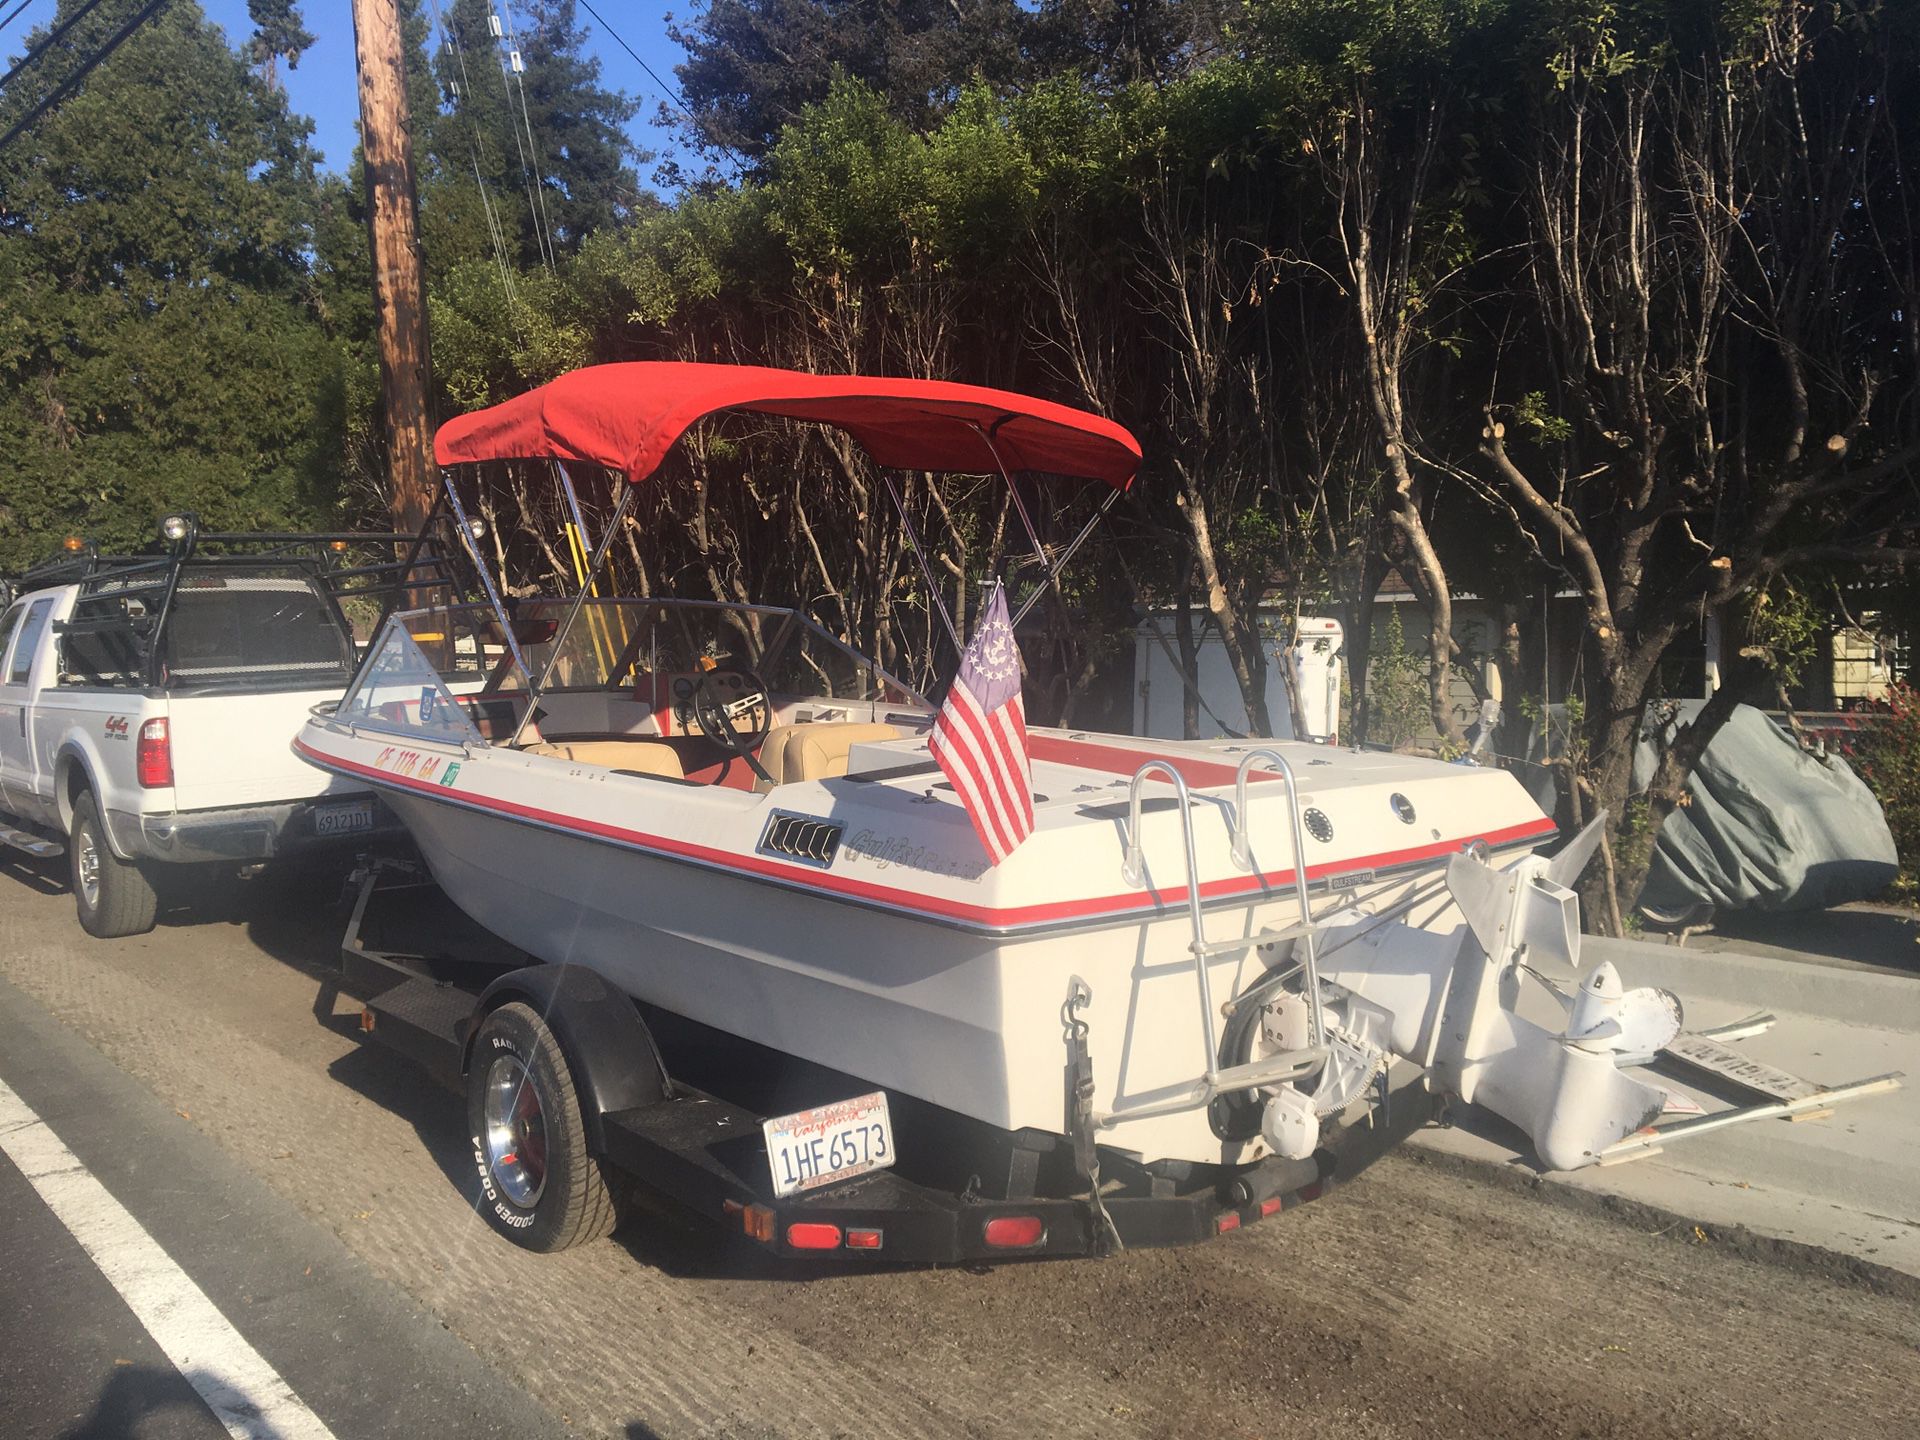 19’ deep V runabout inboard ford 302 runs great lots of upgrades great family boat w/lots of extras 1950